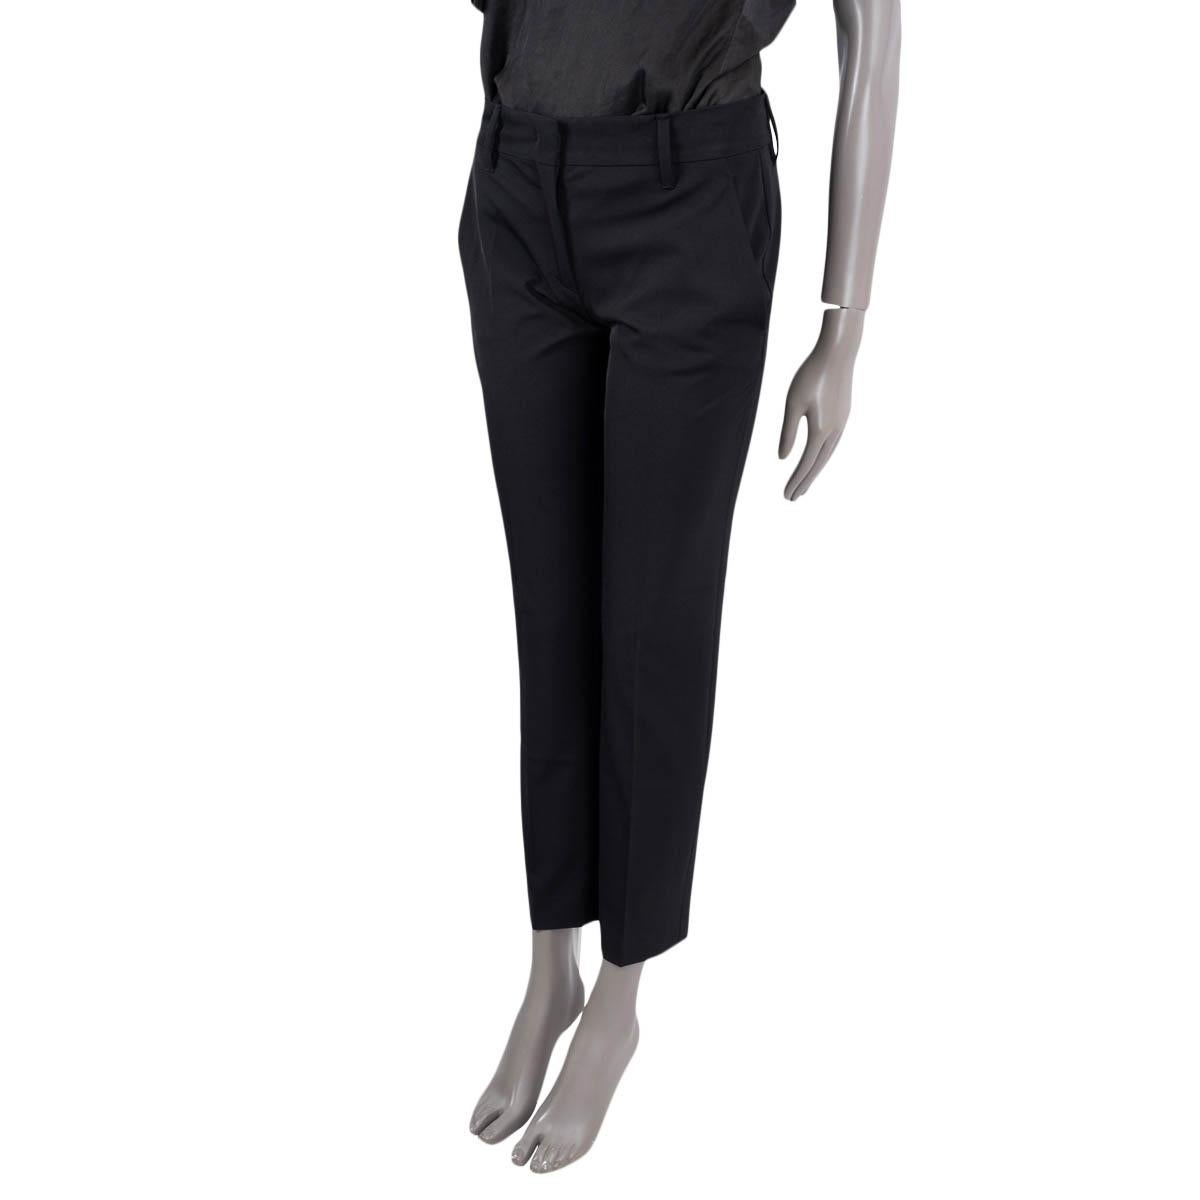 100% authentic Prada technical stretch pants in black recyceltes polyester (89%) and elastane (11%). Features belt loops two side and back pockets. Close on the front with with a concealed zipper, button and hook fastener. Unlined. Have been worn